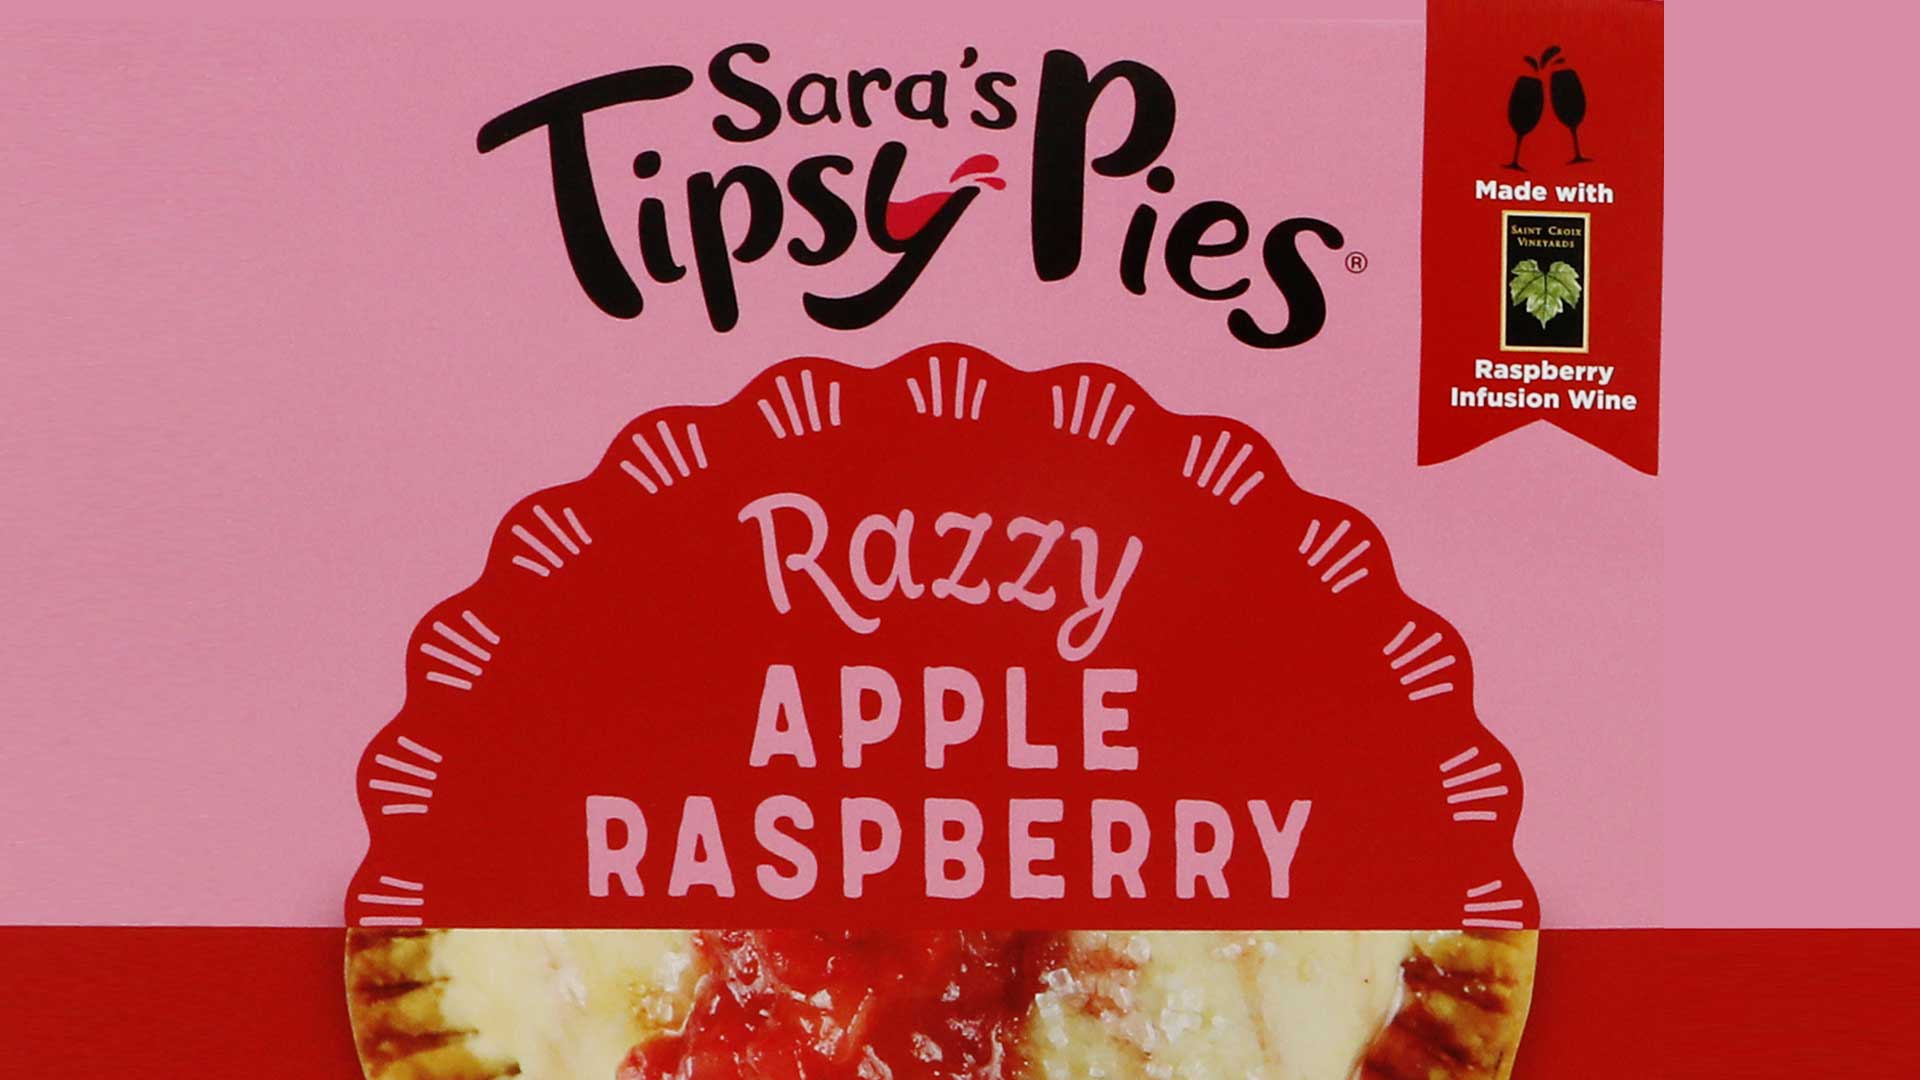 Packaging for Sara's Tipsy Pies